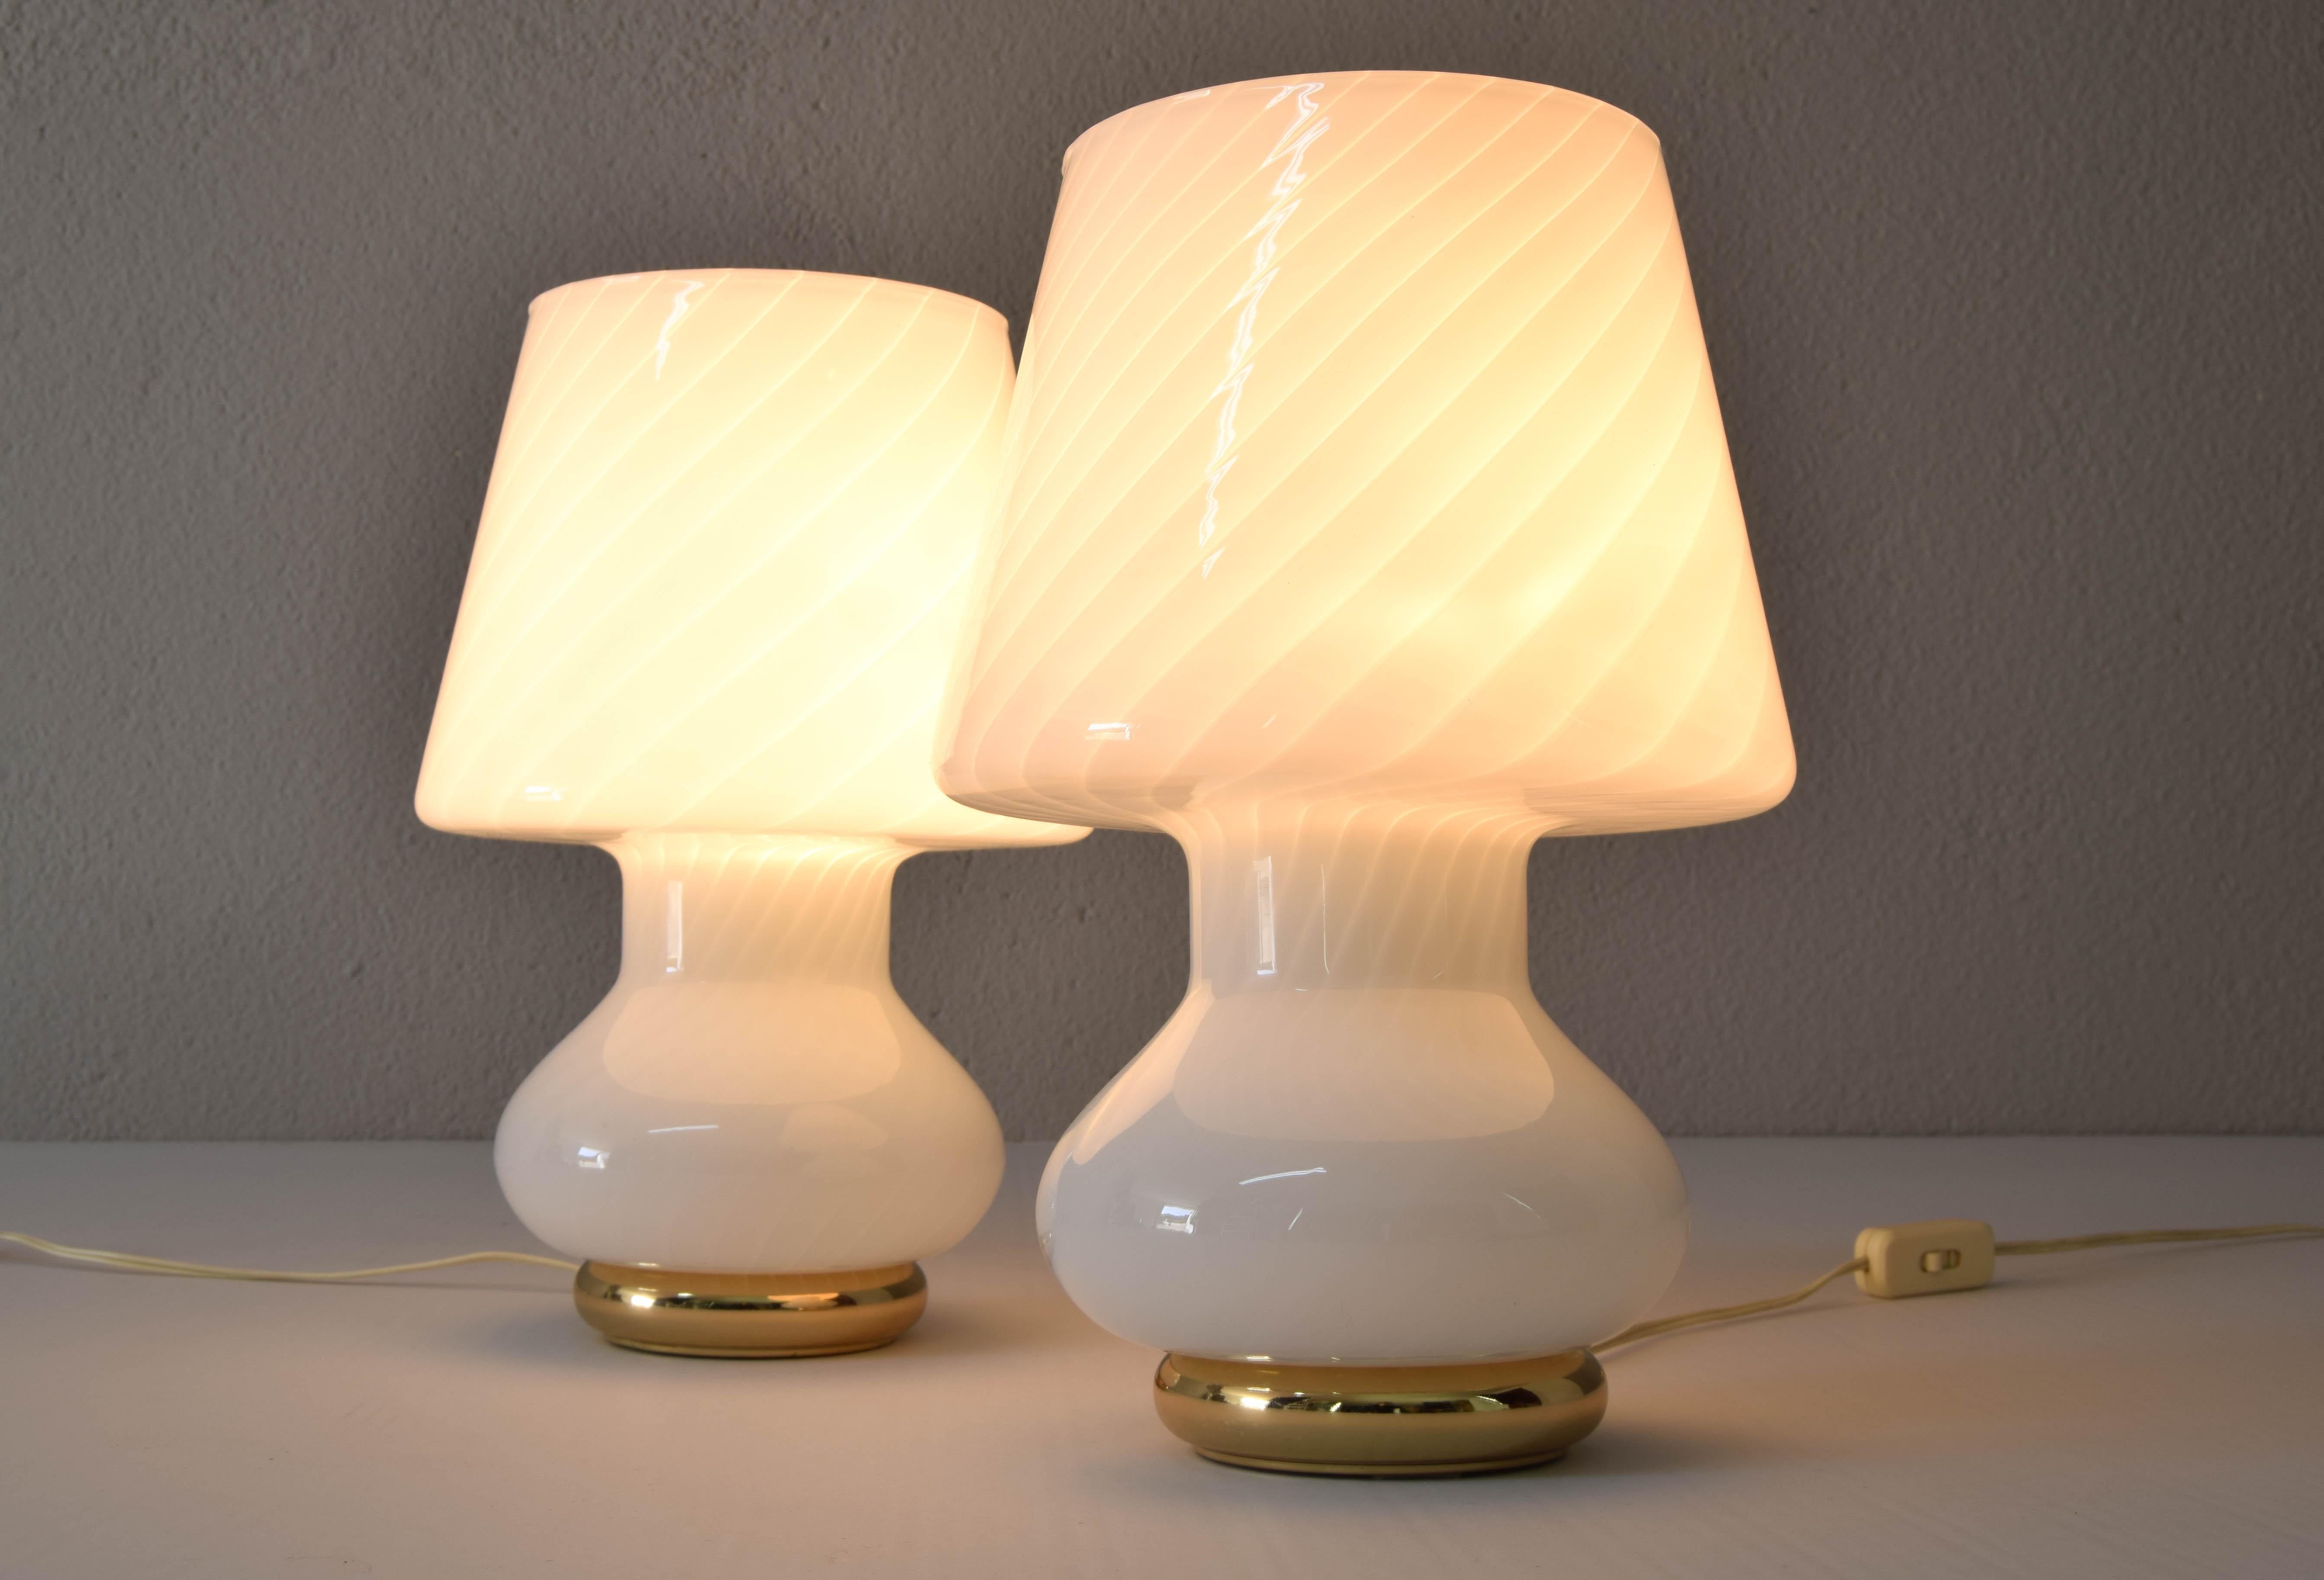 Pair of MidCentury Modern Murano Glass Mushroom Table Lamps for Vetri Italy 1960 In Good Condition For Sale In Escalona, Toledo